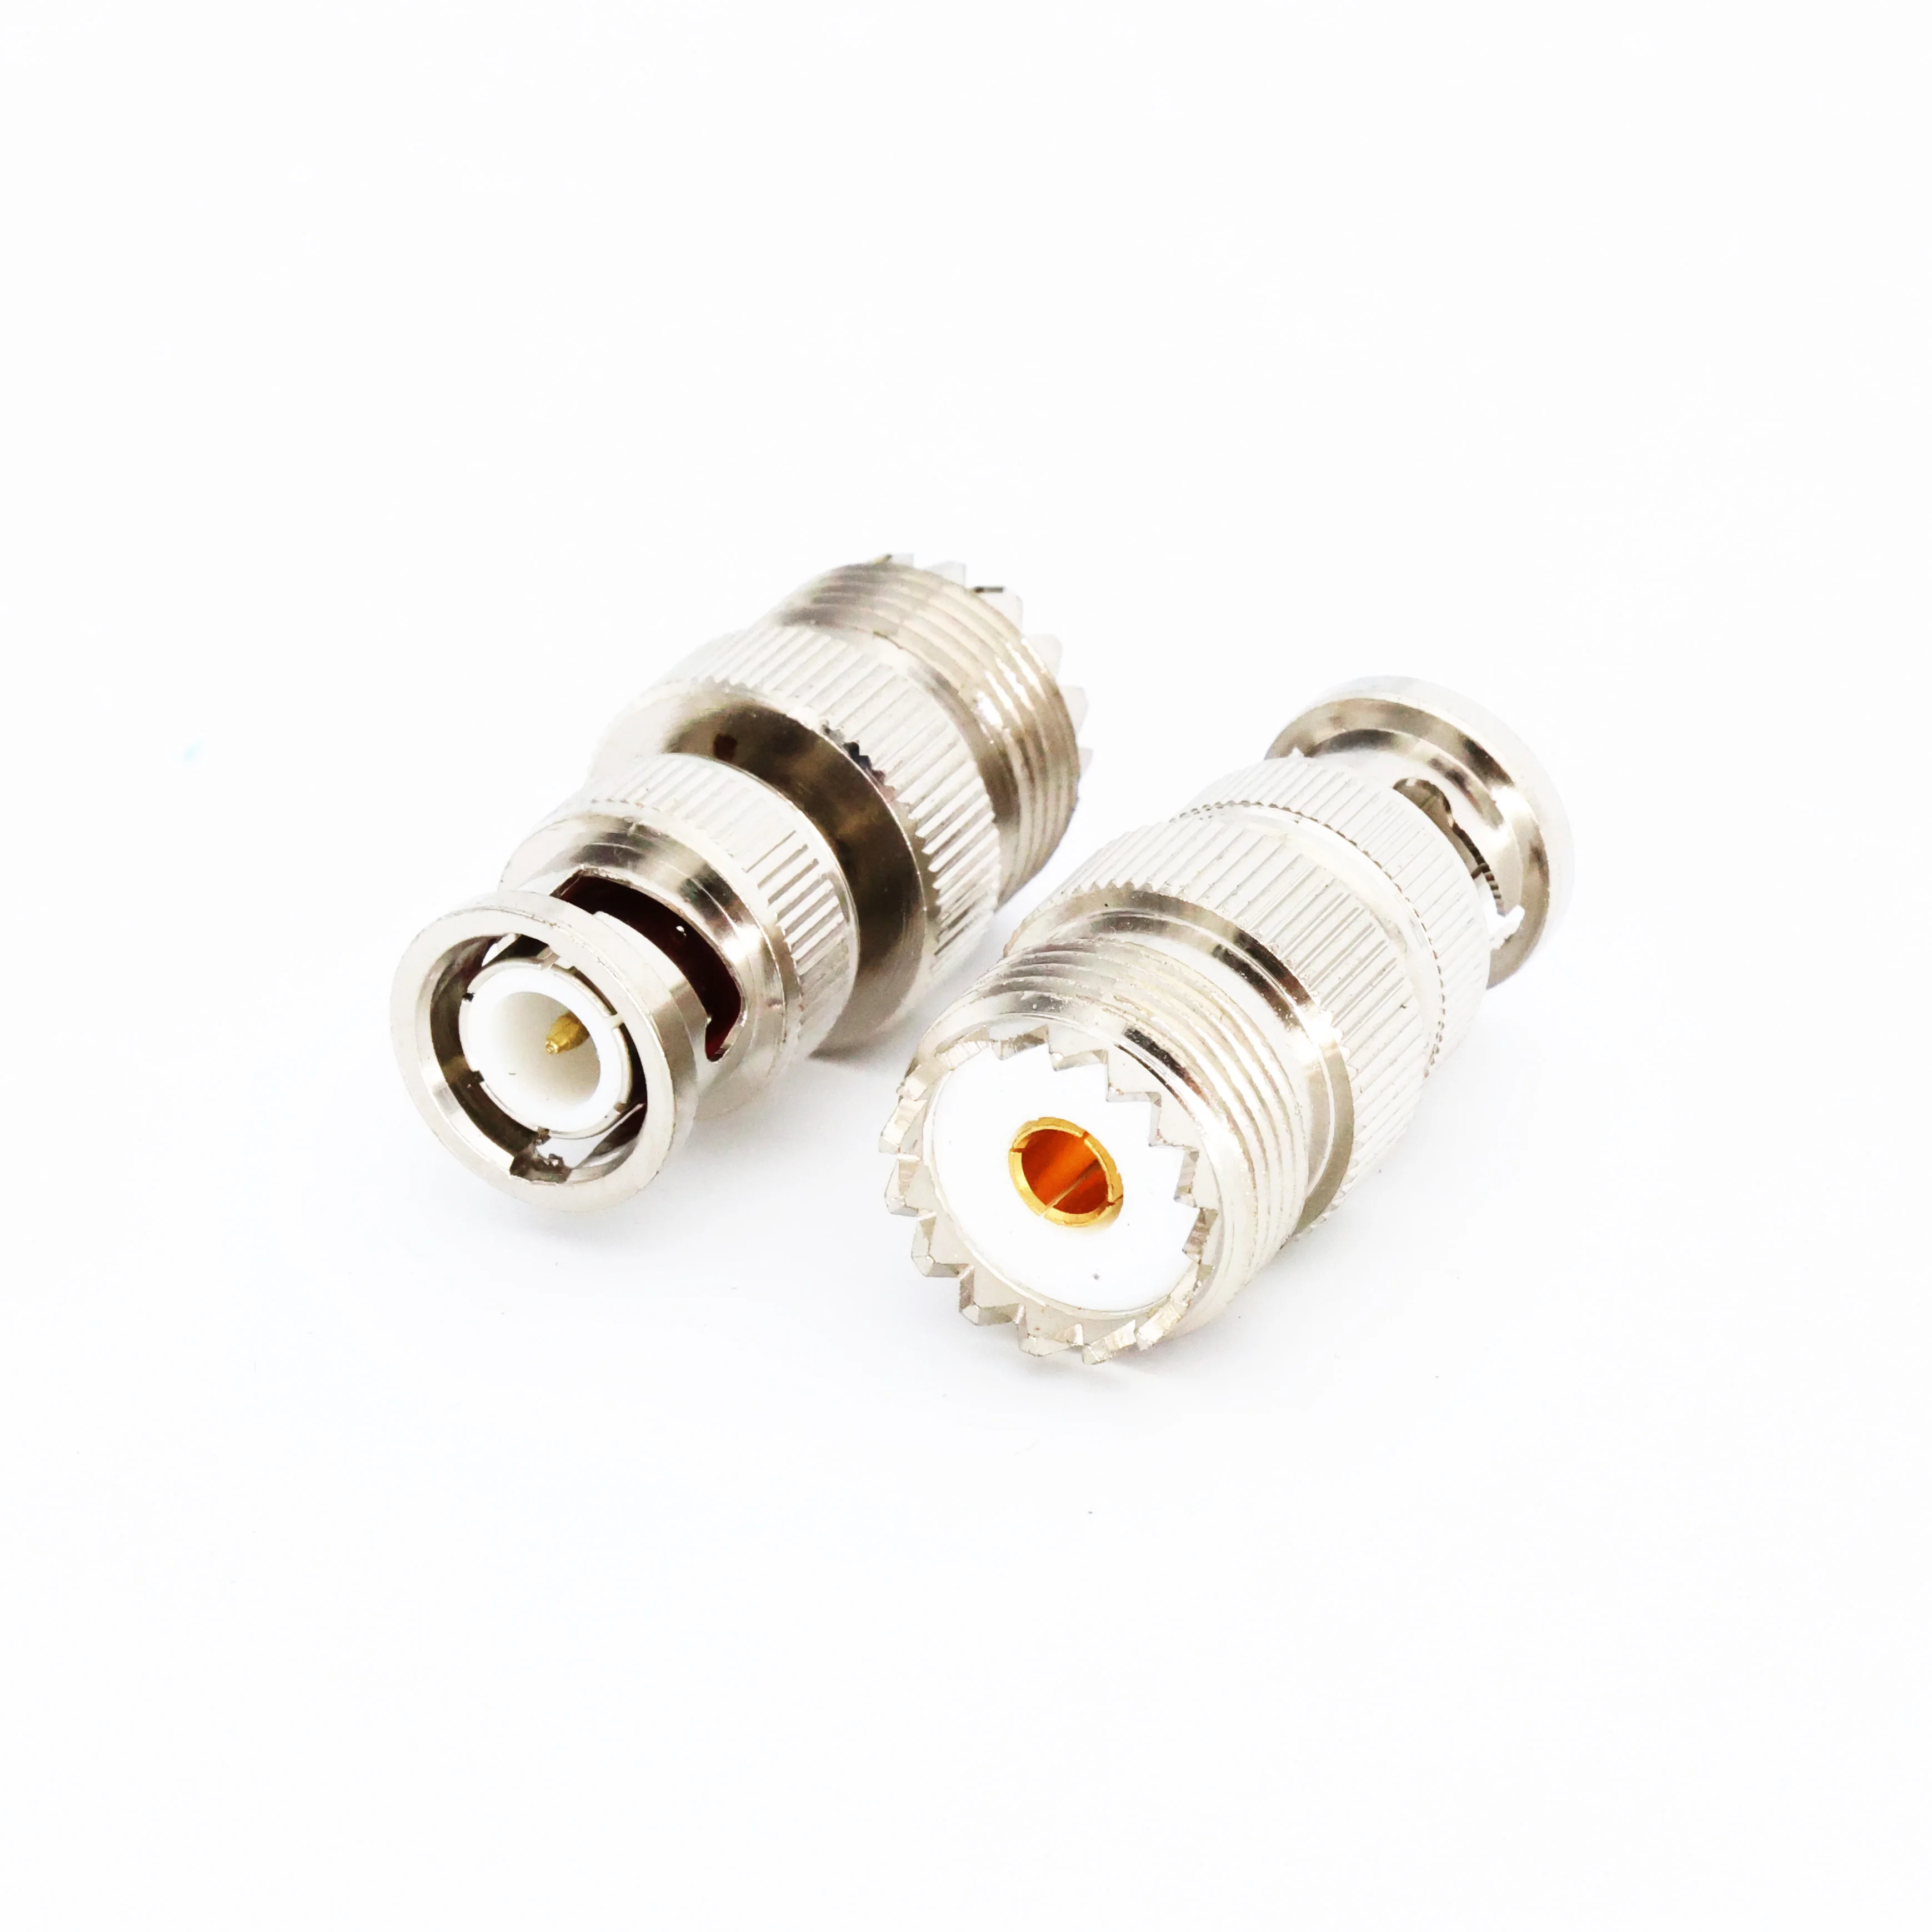 2pcs Cleqee BNC Male to UHF SO239 PL-259 Female RF Coaxial Adapter BNC to UHF Coax Jack Connector 2pcs f type coupler adapter connector female f f jack rg6 coax coaxial cable used in video sma rf coax connector plug